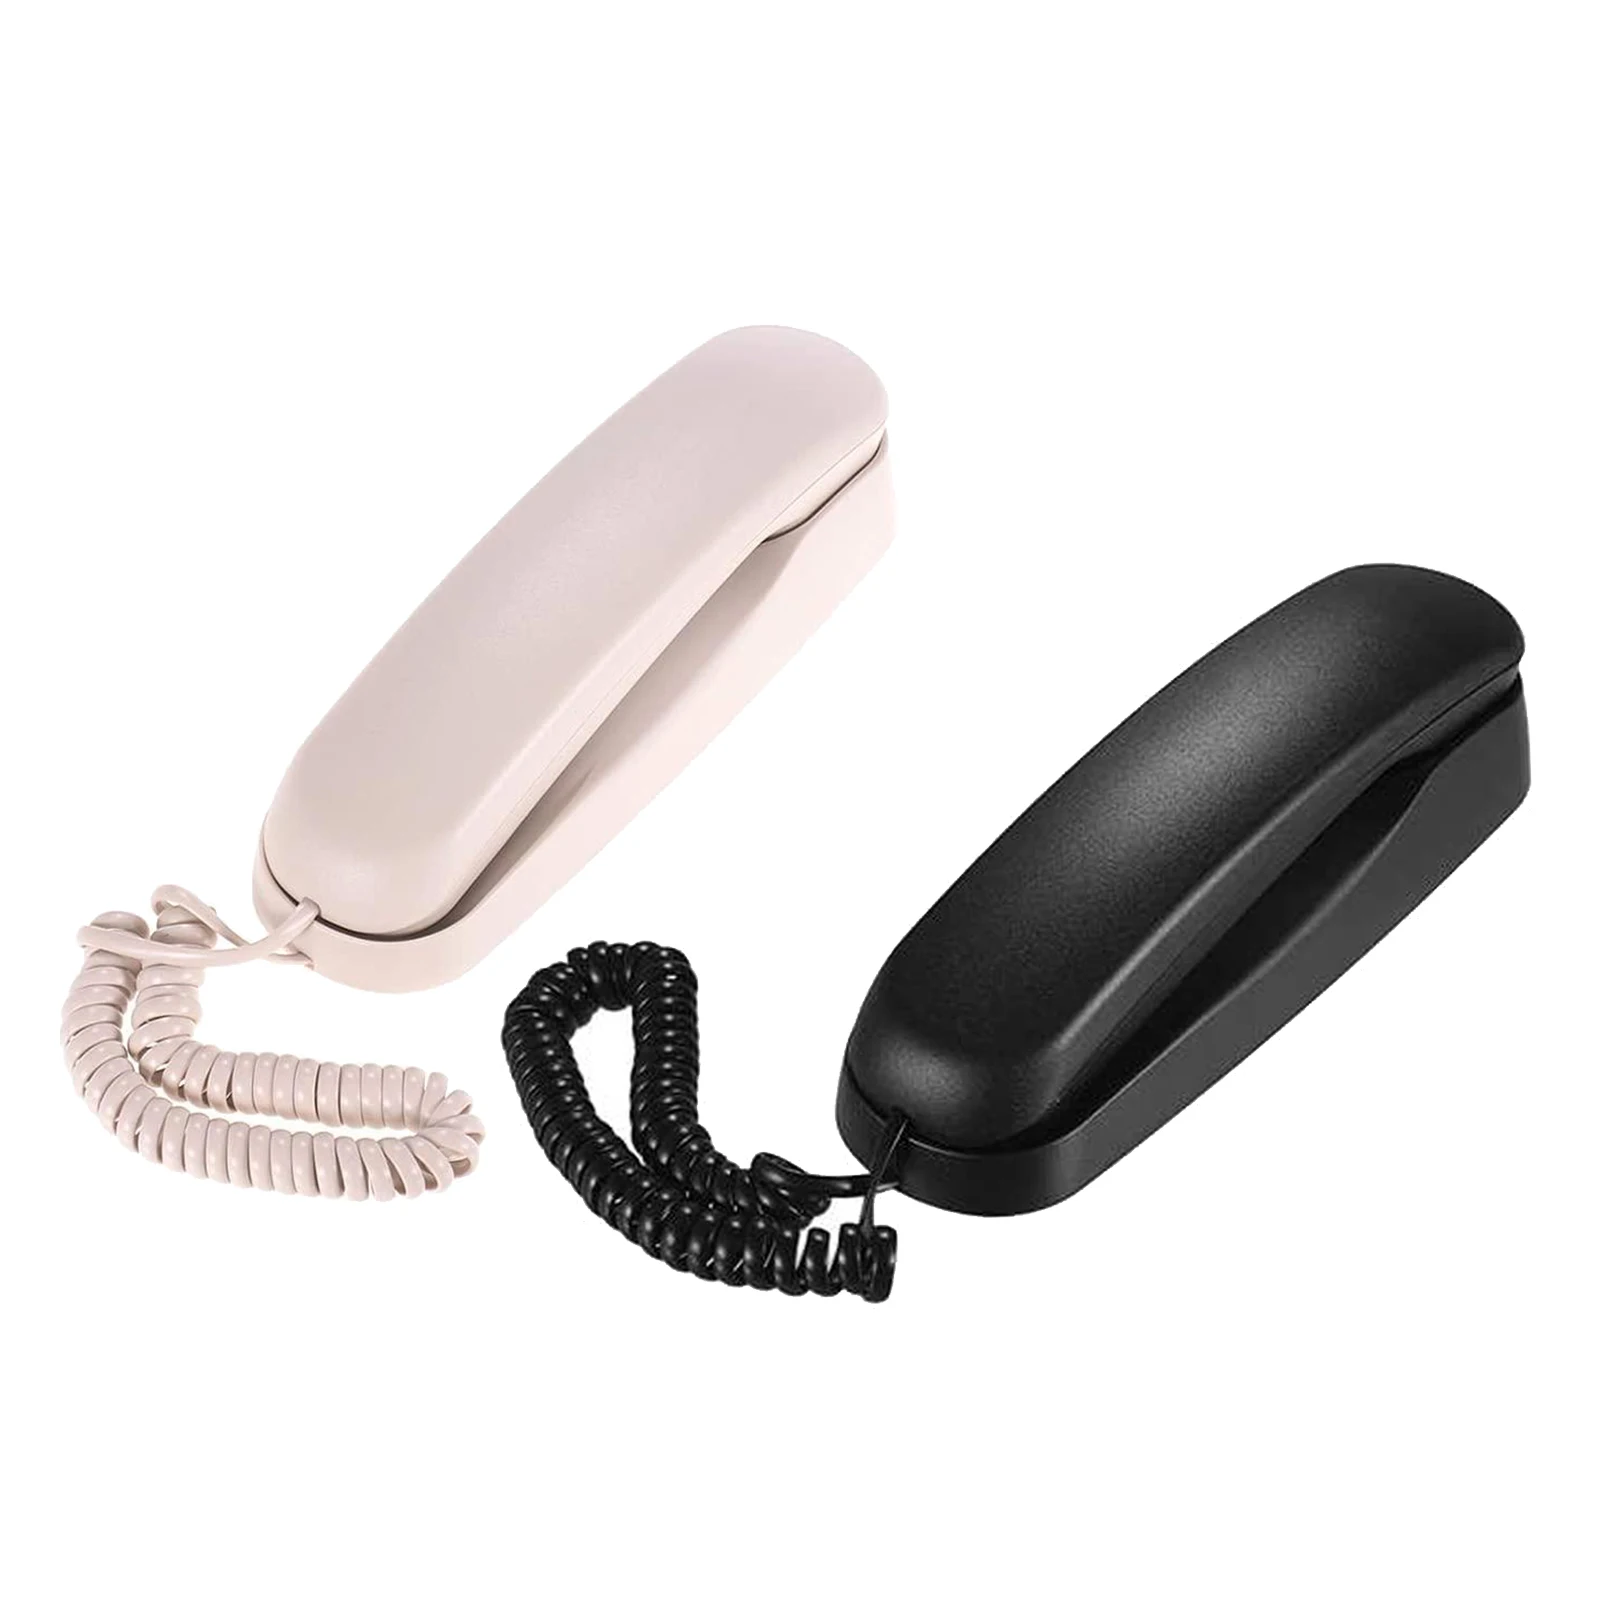 Mini Phone Wall-mount Telephone Desktop Landline Wired Hanging Telephone for Home Office Hotel Business Use